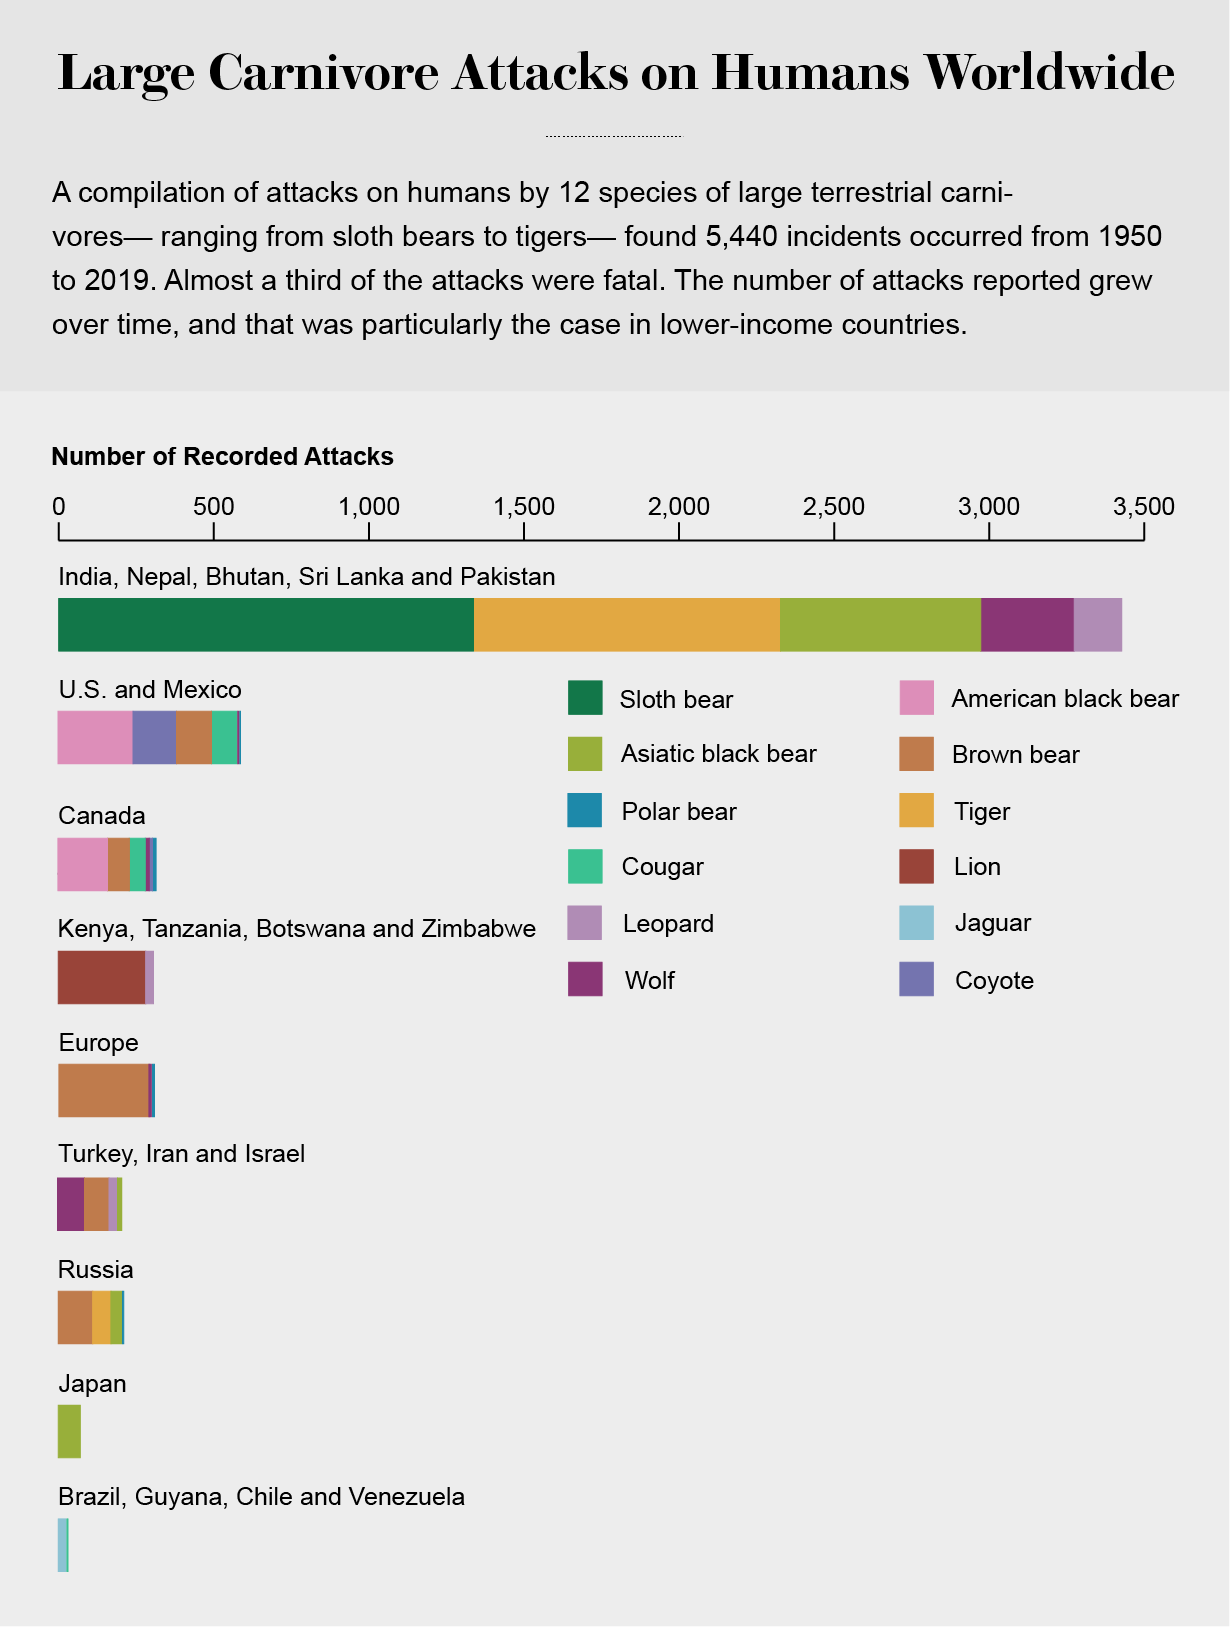 Chart shows the number of attacks on humans by various large terrestrial carnivores by country or region, with India, Nepal, Bhutan, Sri Lanka and Pakistan having the most attacks overall.